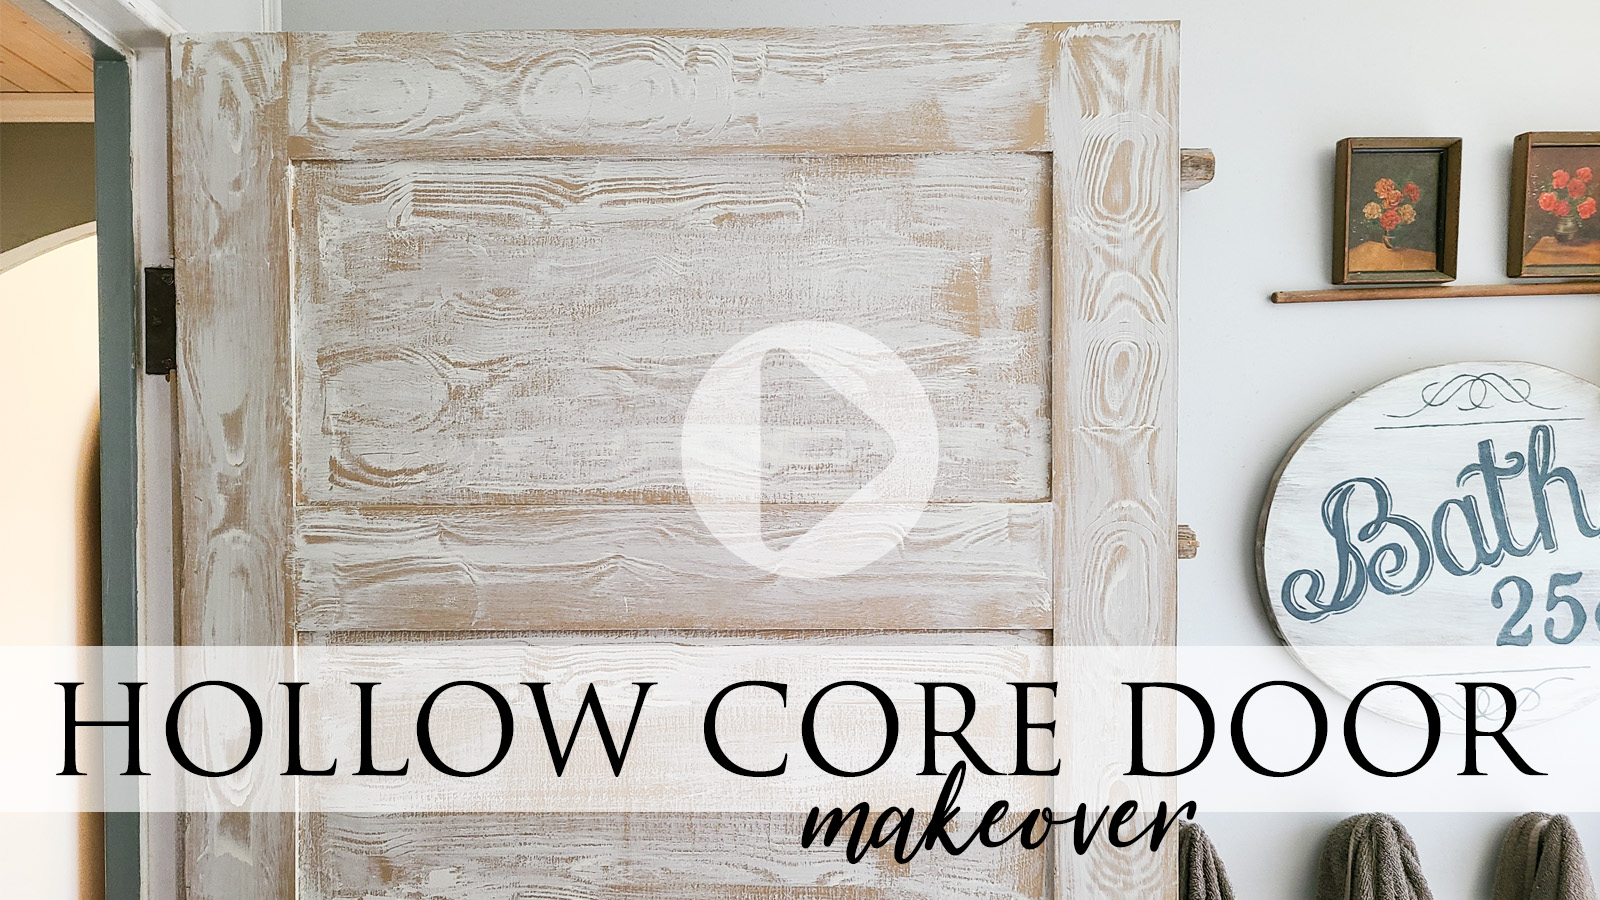 DIY Video Tutorial for a Hollow Core Door Makeover by Larissa of Prodigal Pieces | prodigalpieces.com #prodigalpieces